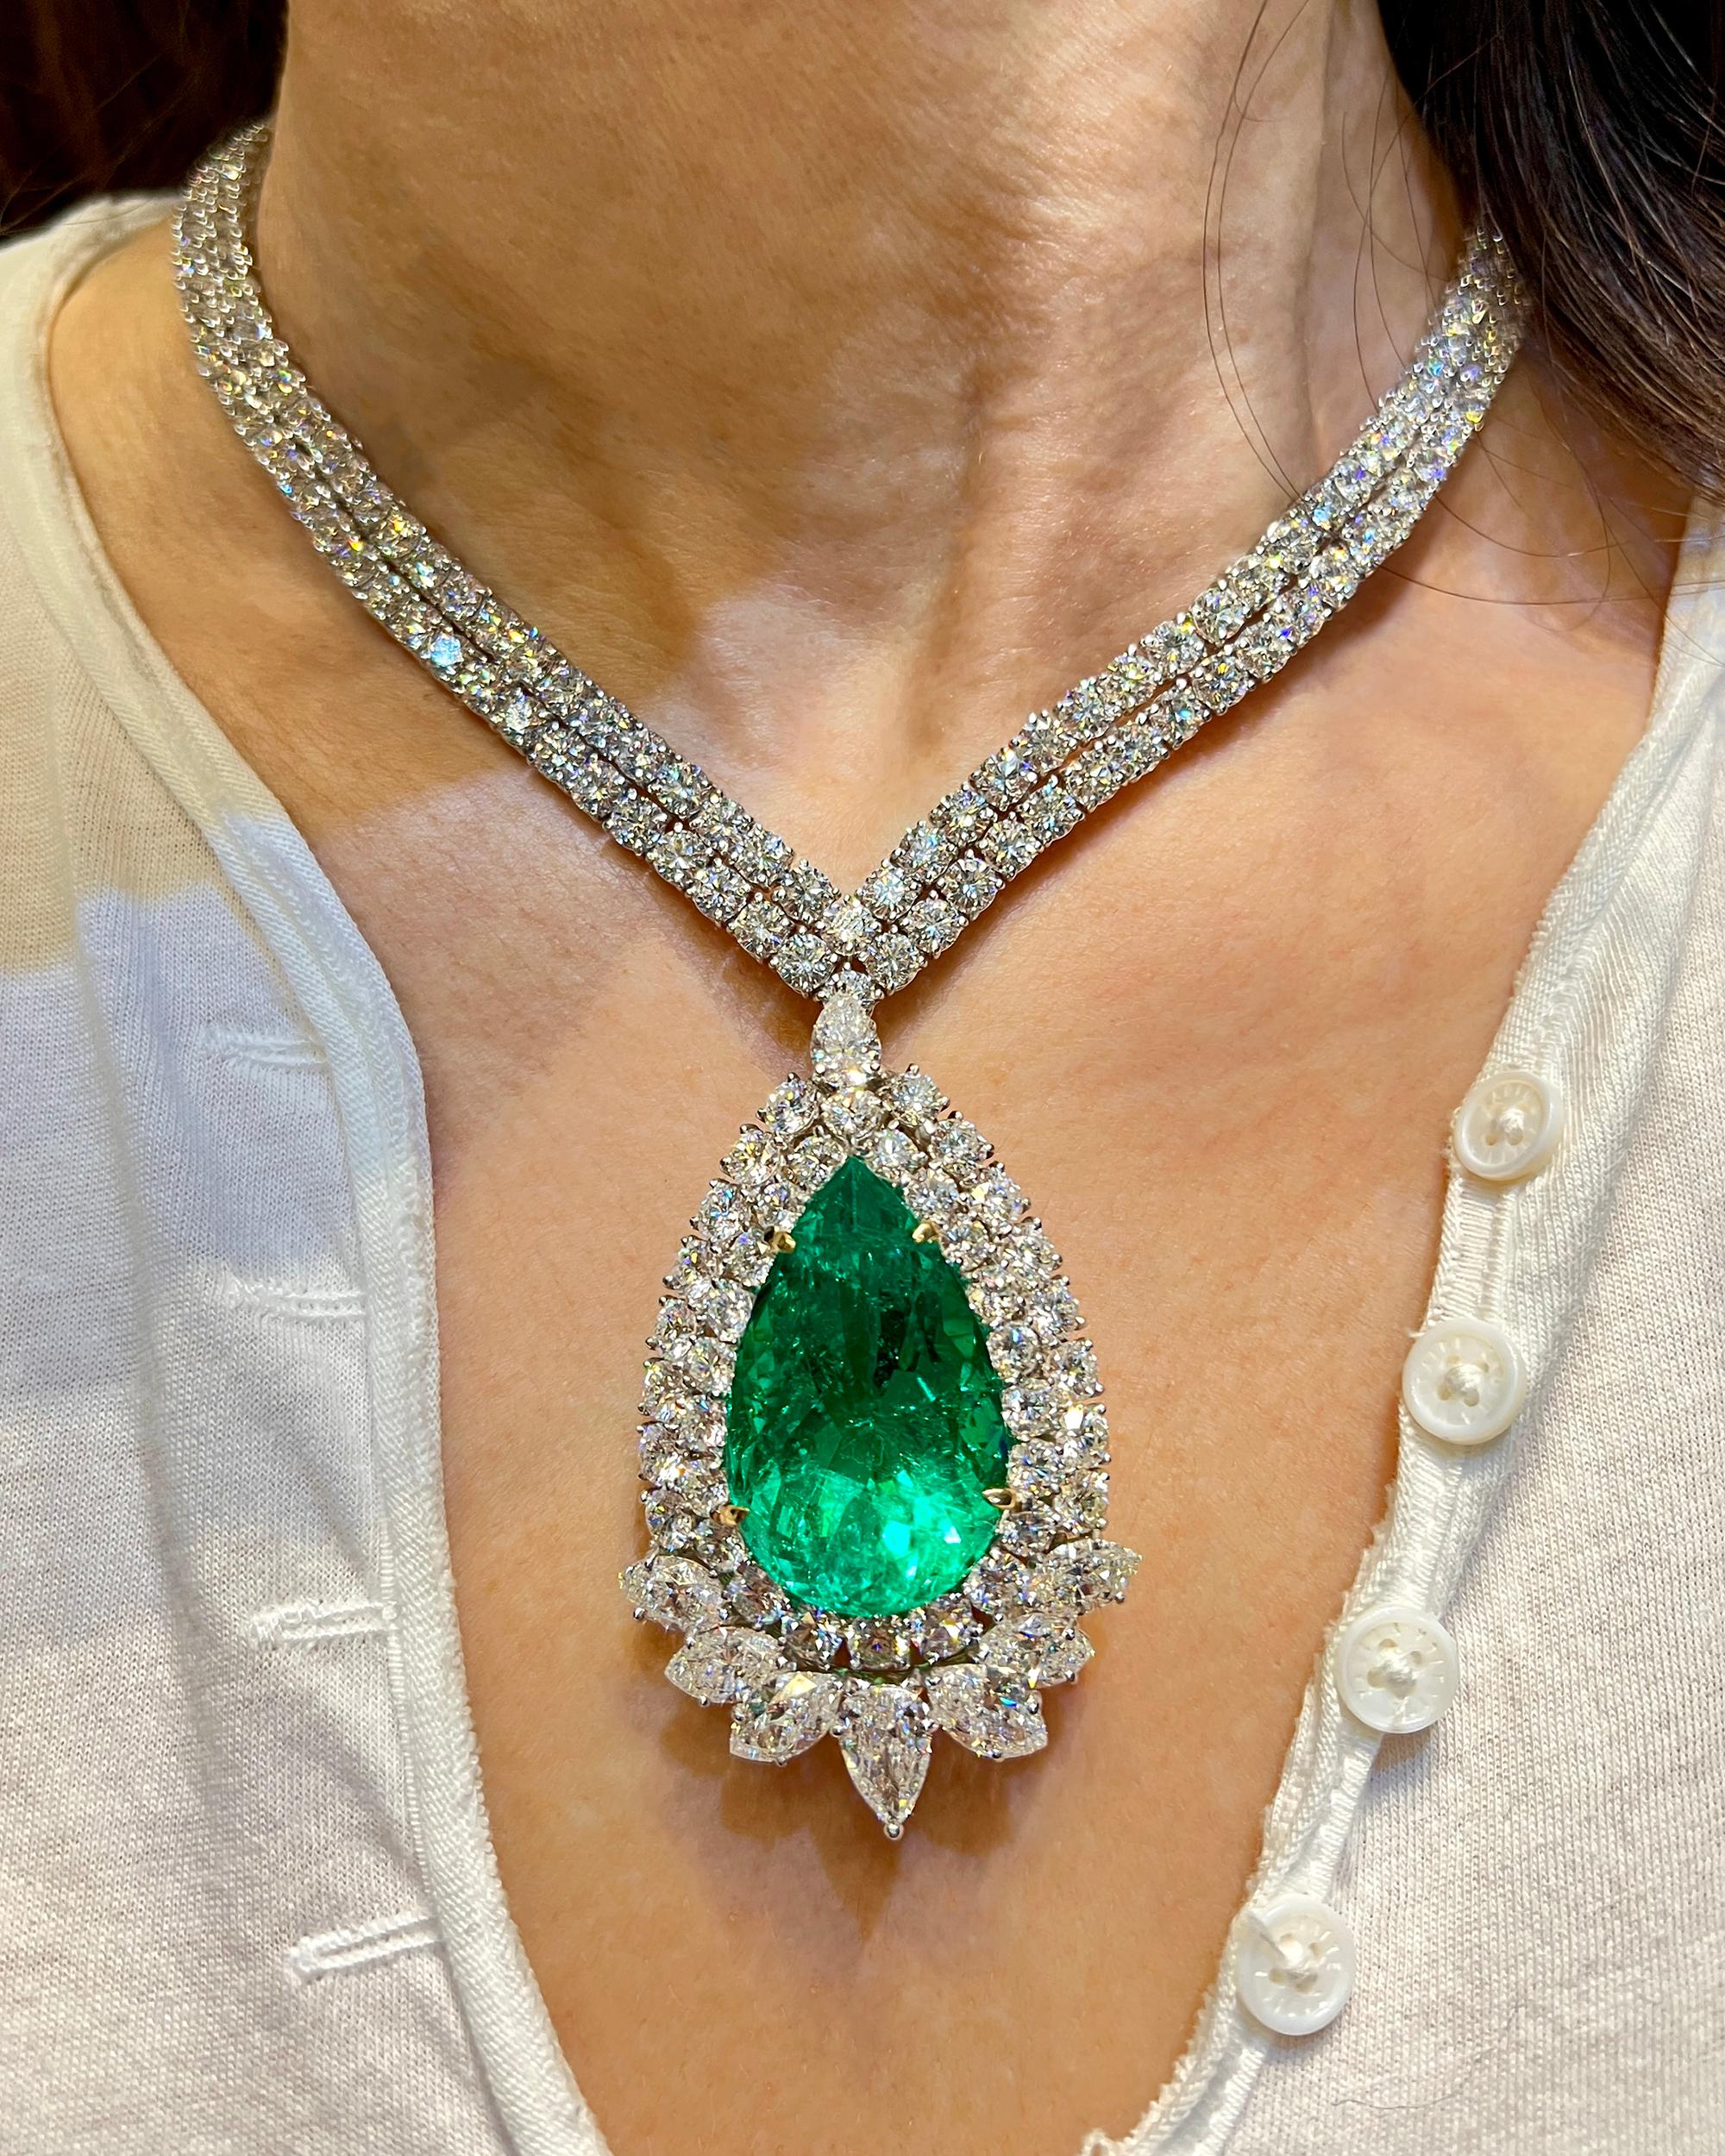 A breathtaking work of art, behold the glorious 47.76ct PS Colombian Emerald Pendant Diamond Necklace. This exquisite masterpiece exudes elegance and grace, capturing the essence of luxury and refinement.

At its heart lies a mesmerizing 47.76-carat